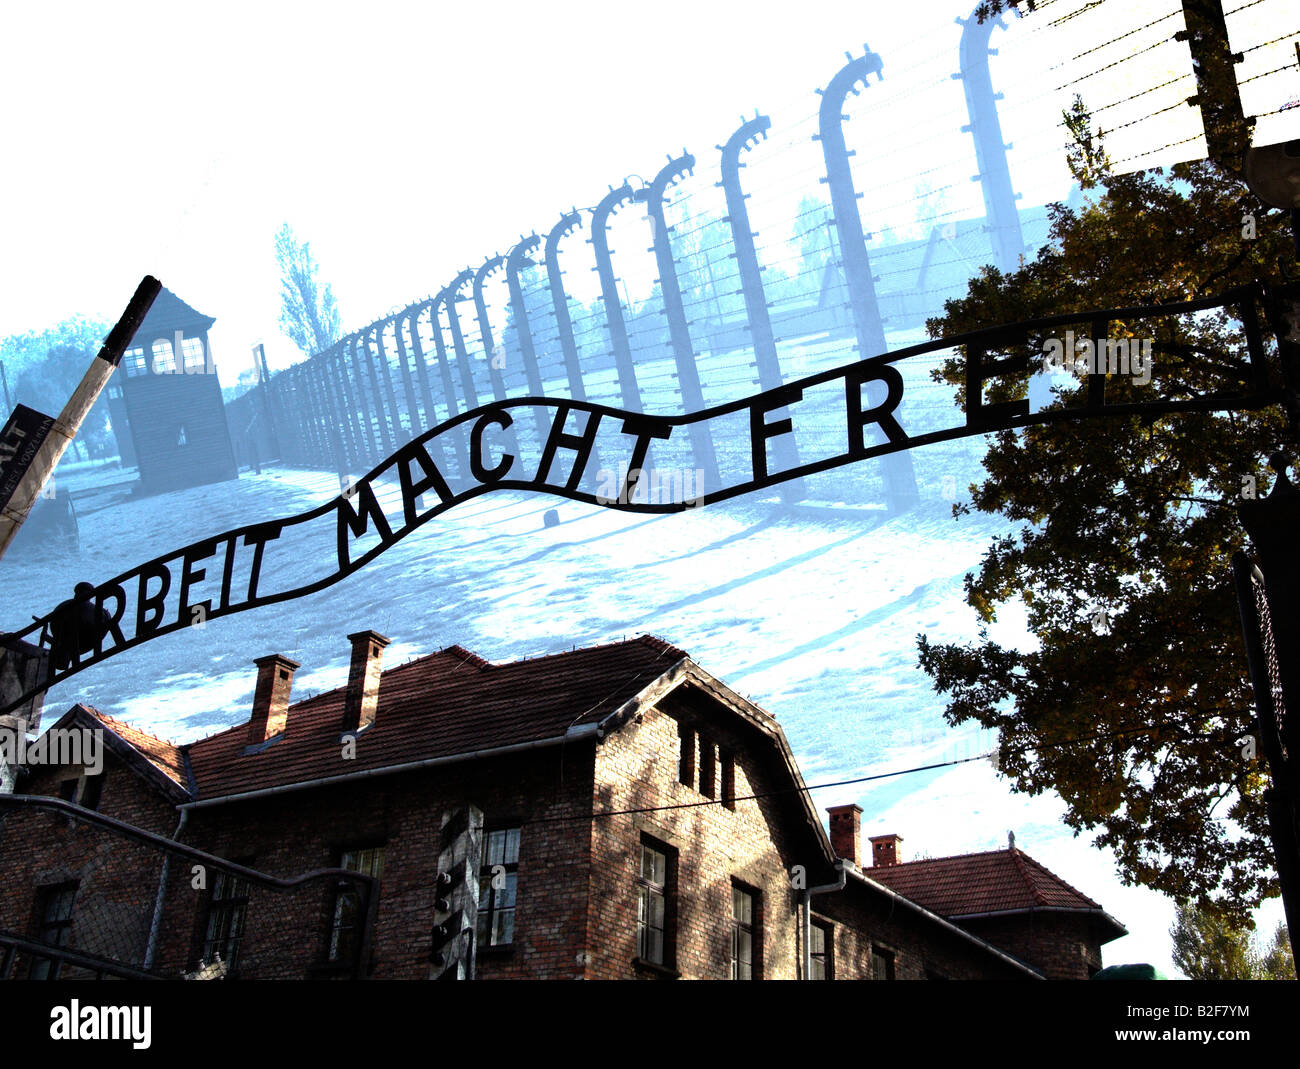 Auschwitz  FOR EDITORIAL USE ONLY Stock Photo